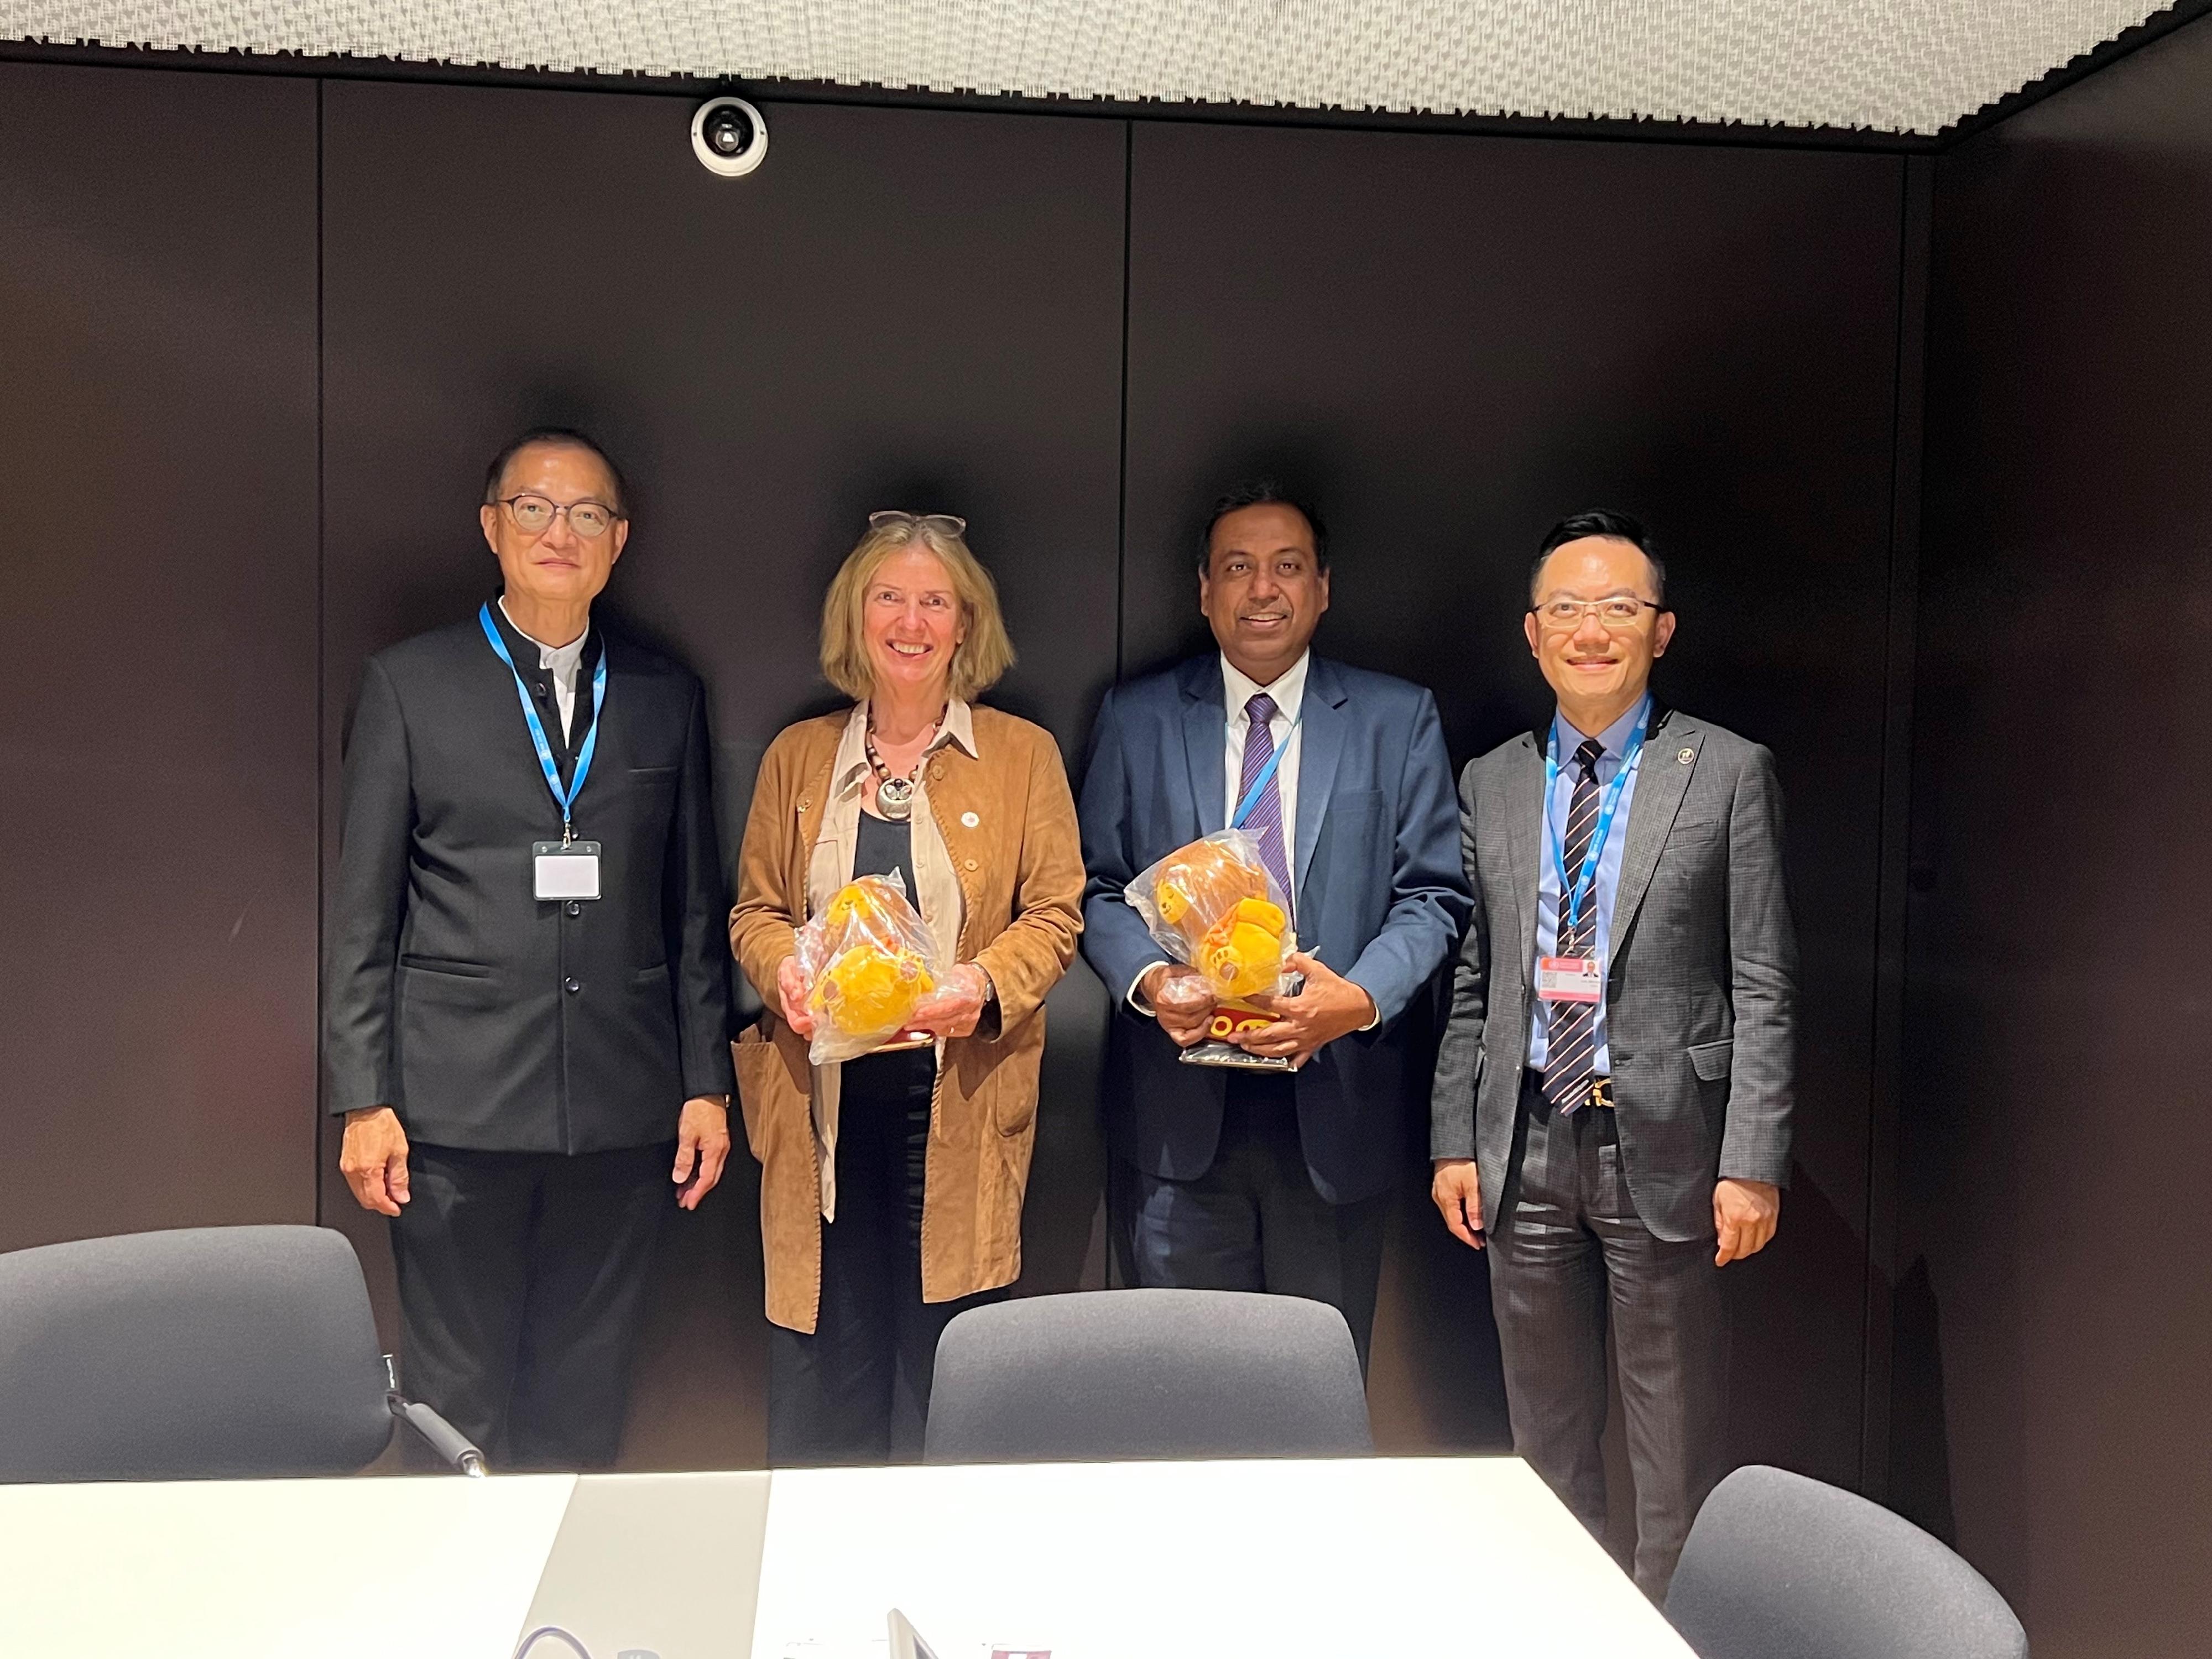 The Secretary for Health, Professor Lo Chung-mau (first left) meets with the Head of the No Tobacco Unit, Health Promotion Team of World Health Organization (WHO), Dr Vinayak Prasad (second right), and the Unit Head of the Physical Activity, Health Promotion Team of WHO, Dr Fiona Bull (second left), in Geneva, Switzerland on May 22 (Geneva time). Professor Lo introduces to them the effort of the Hong Kong Special Administrative Region Government in tobacco control. The Director of Health, Dr Ronald Lam (first right), also attended.